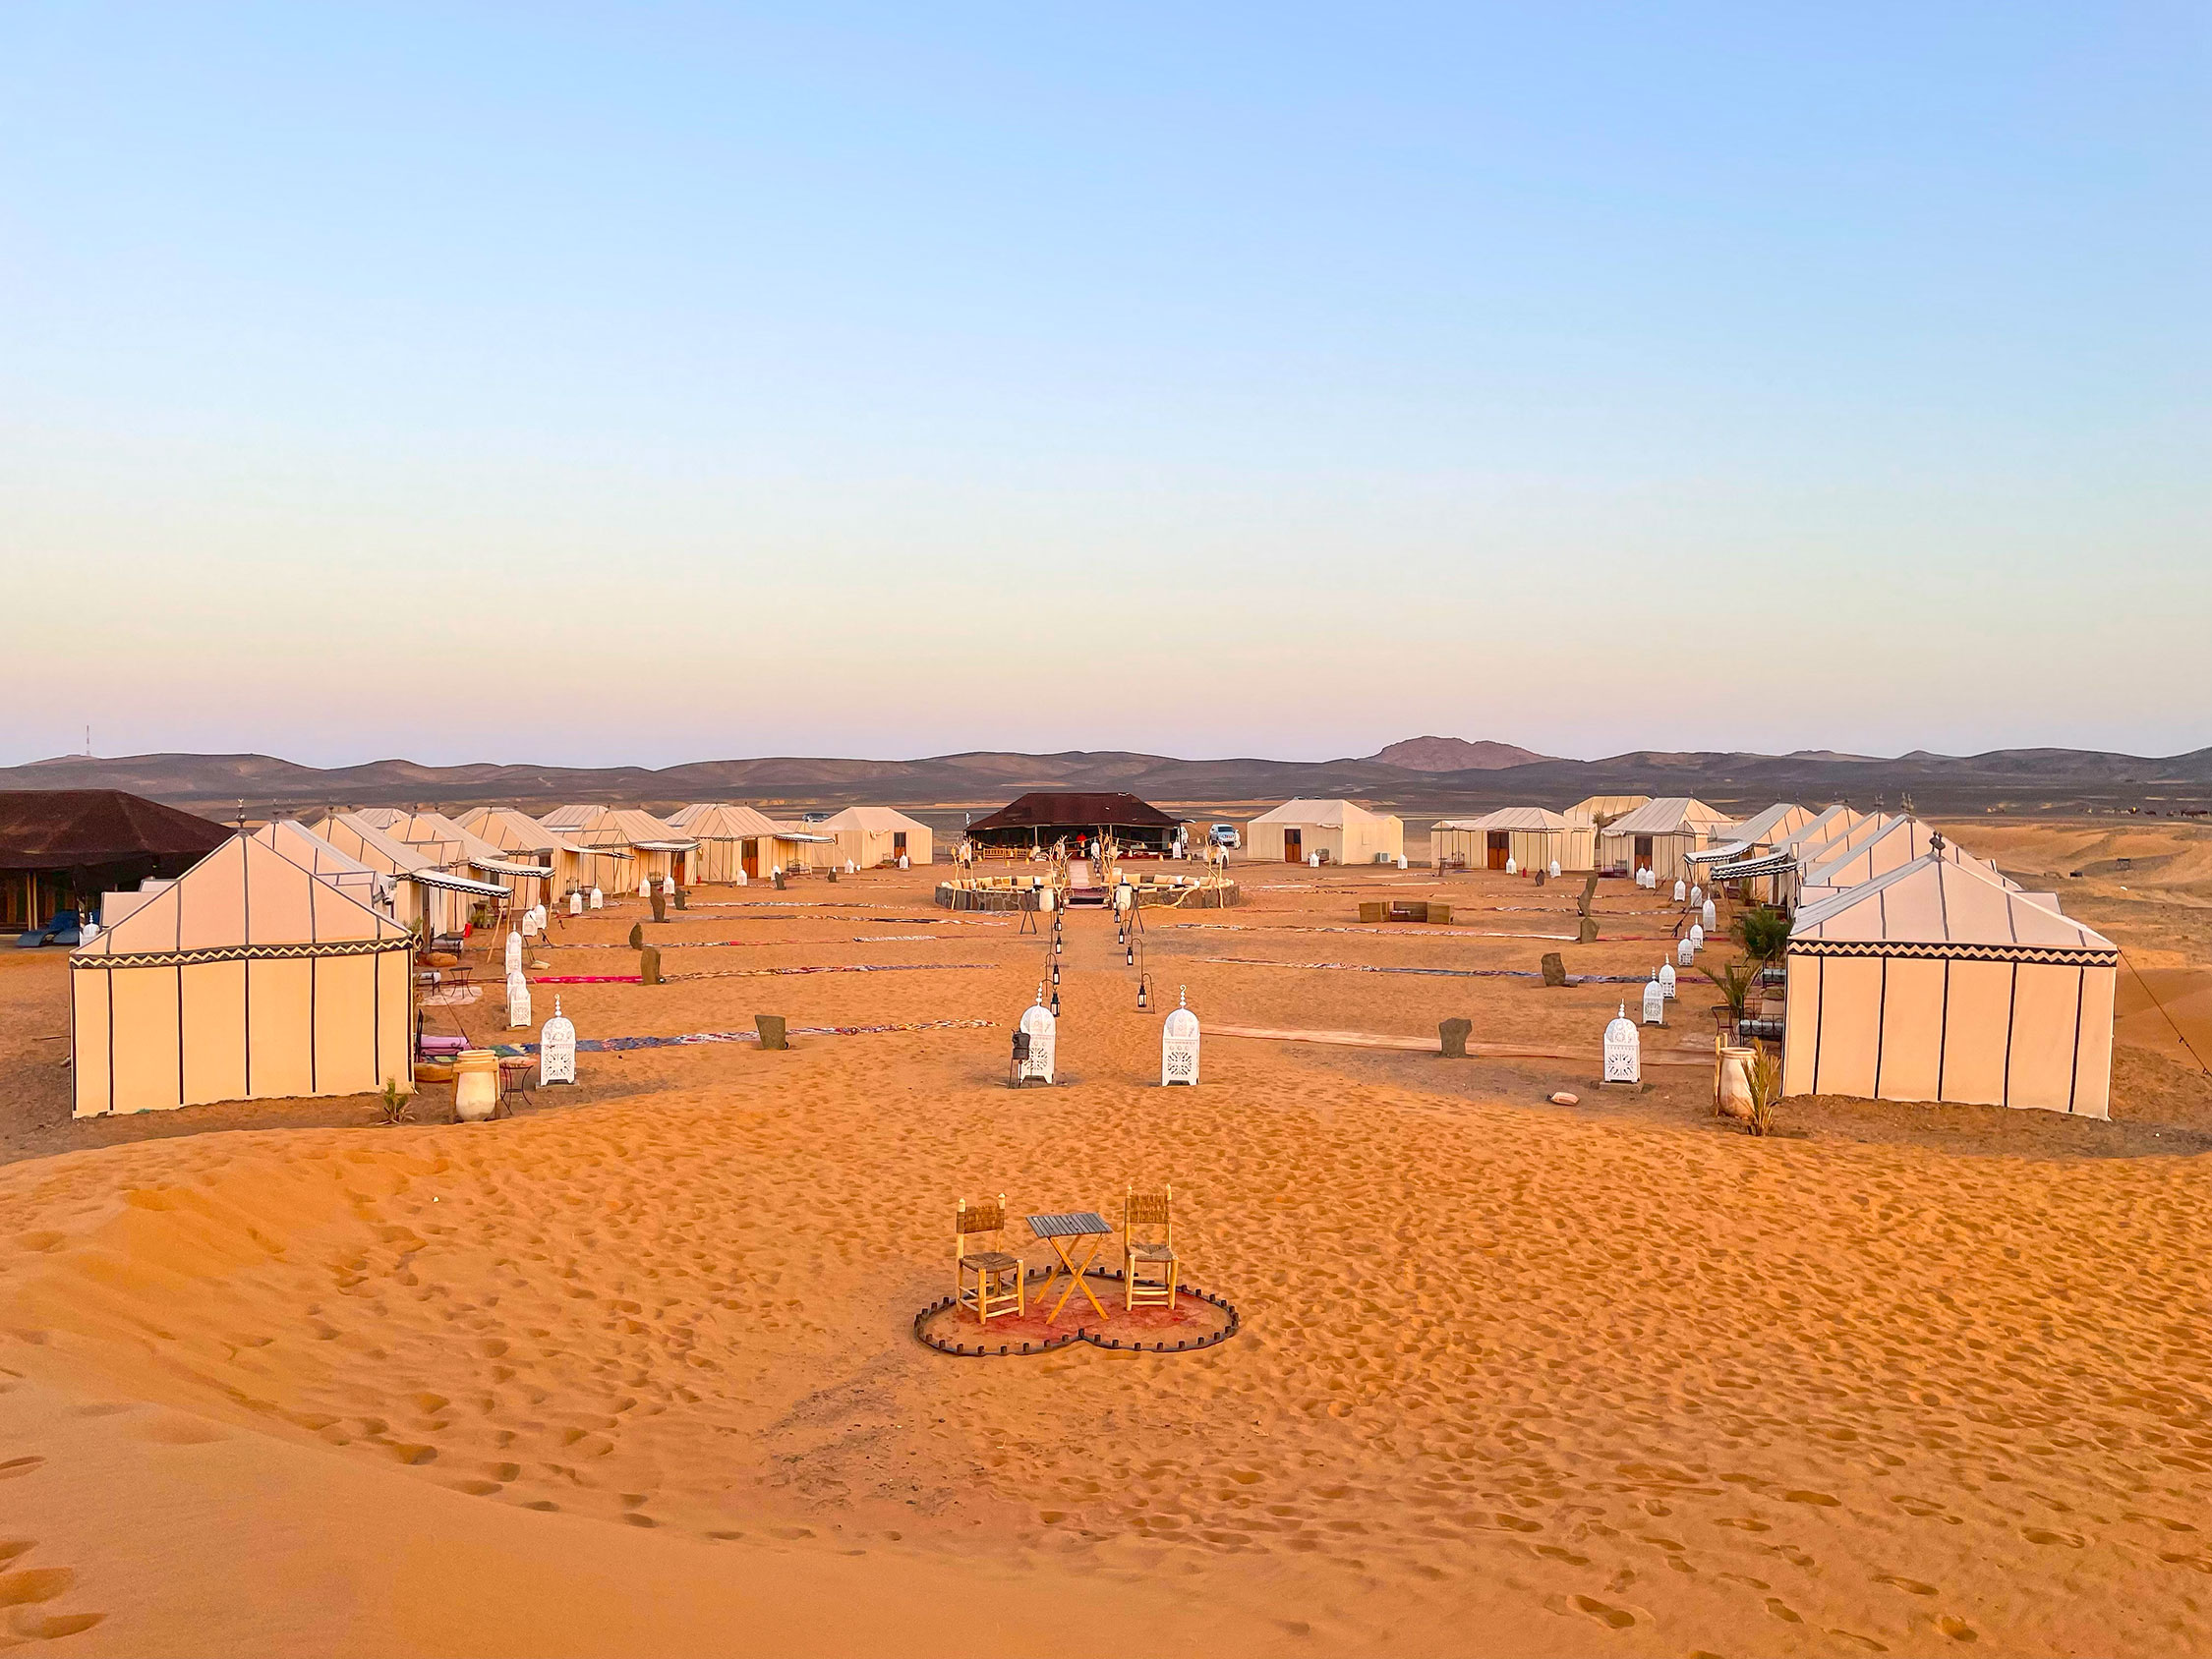 Stay in a luxury desert camp while in the Sahara desert | with CÚRATE Trips